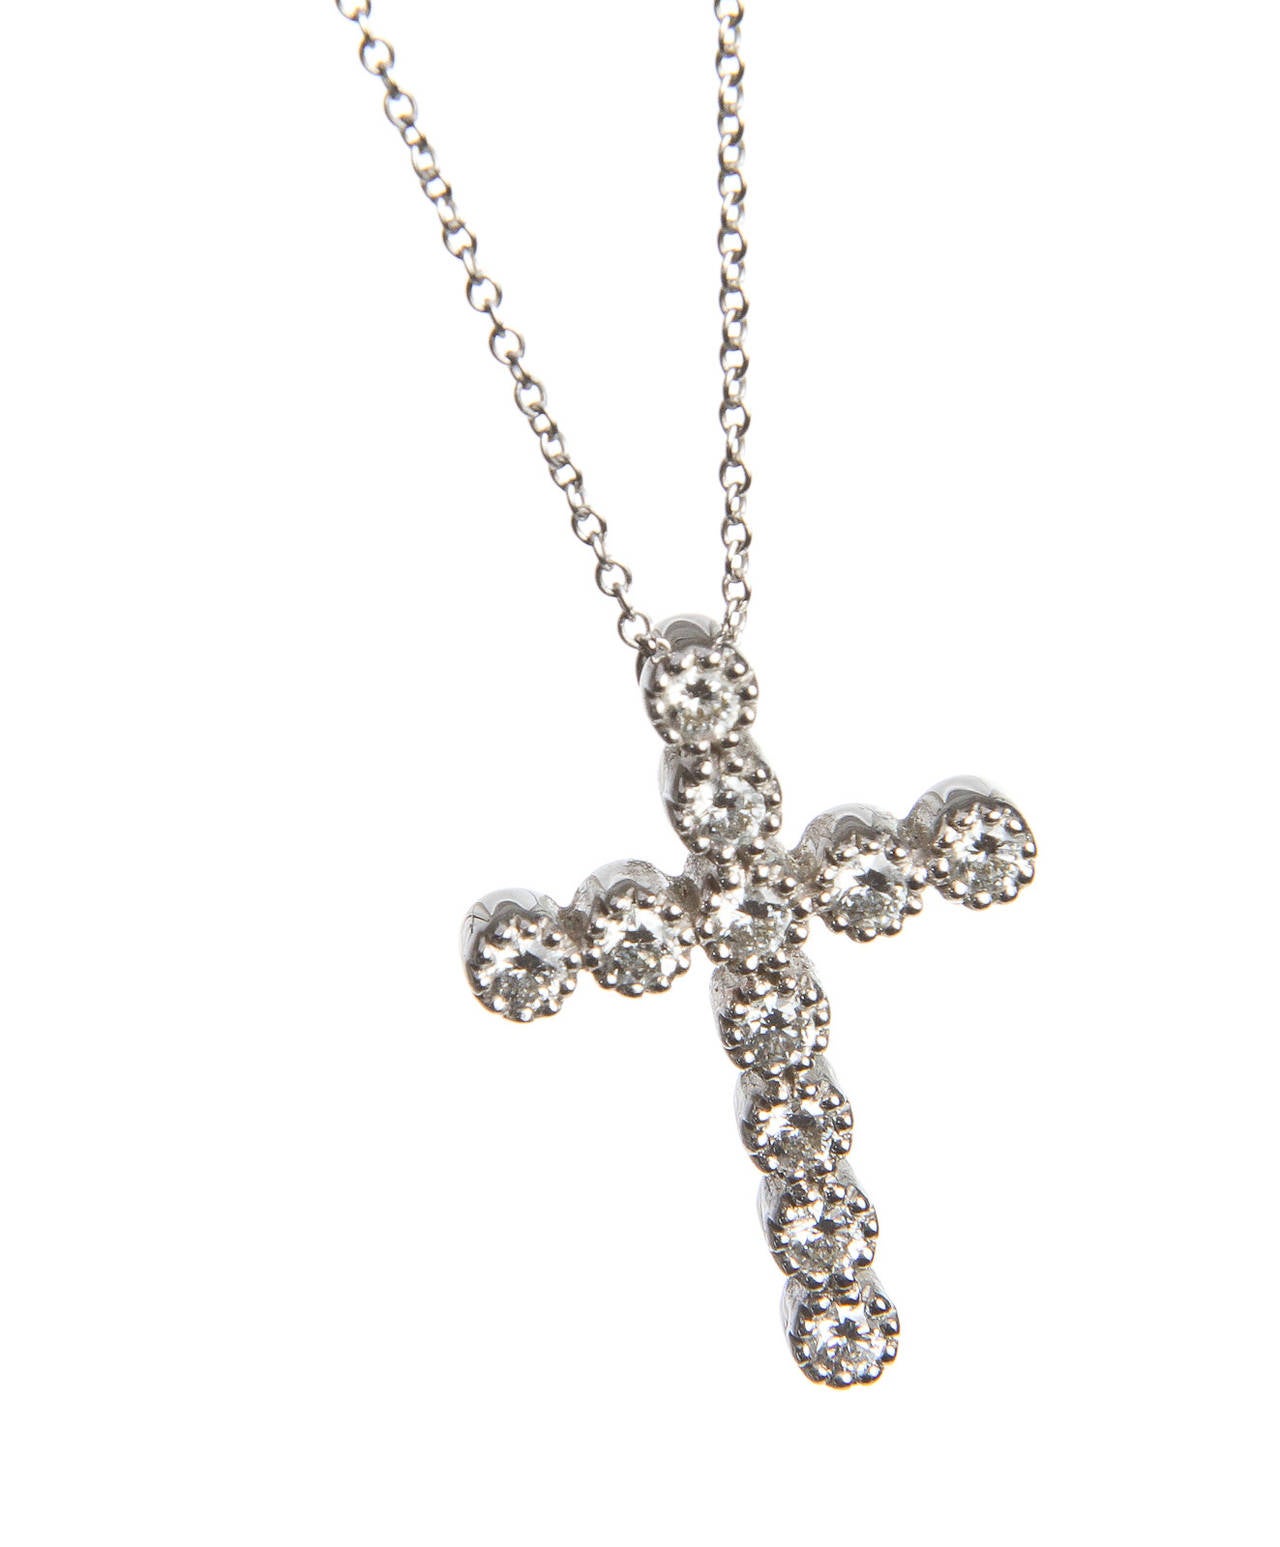 This beautiful diamond cross necklace from Kwiat can easily be yours today. This fabulous necklace has eleven diamonds, set in a beaded bezel.